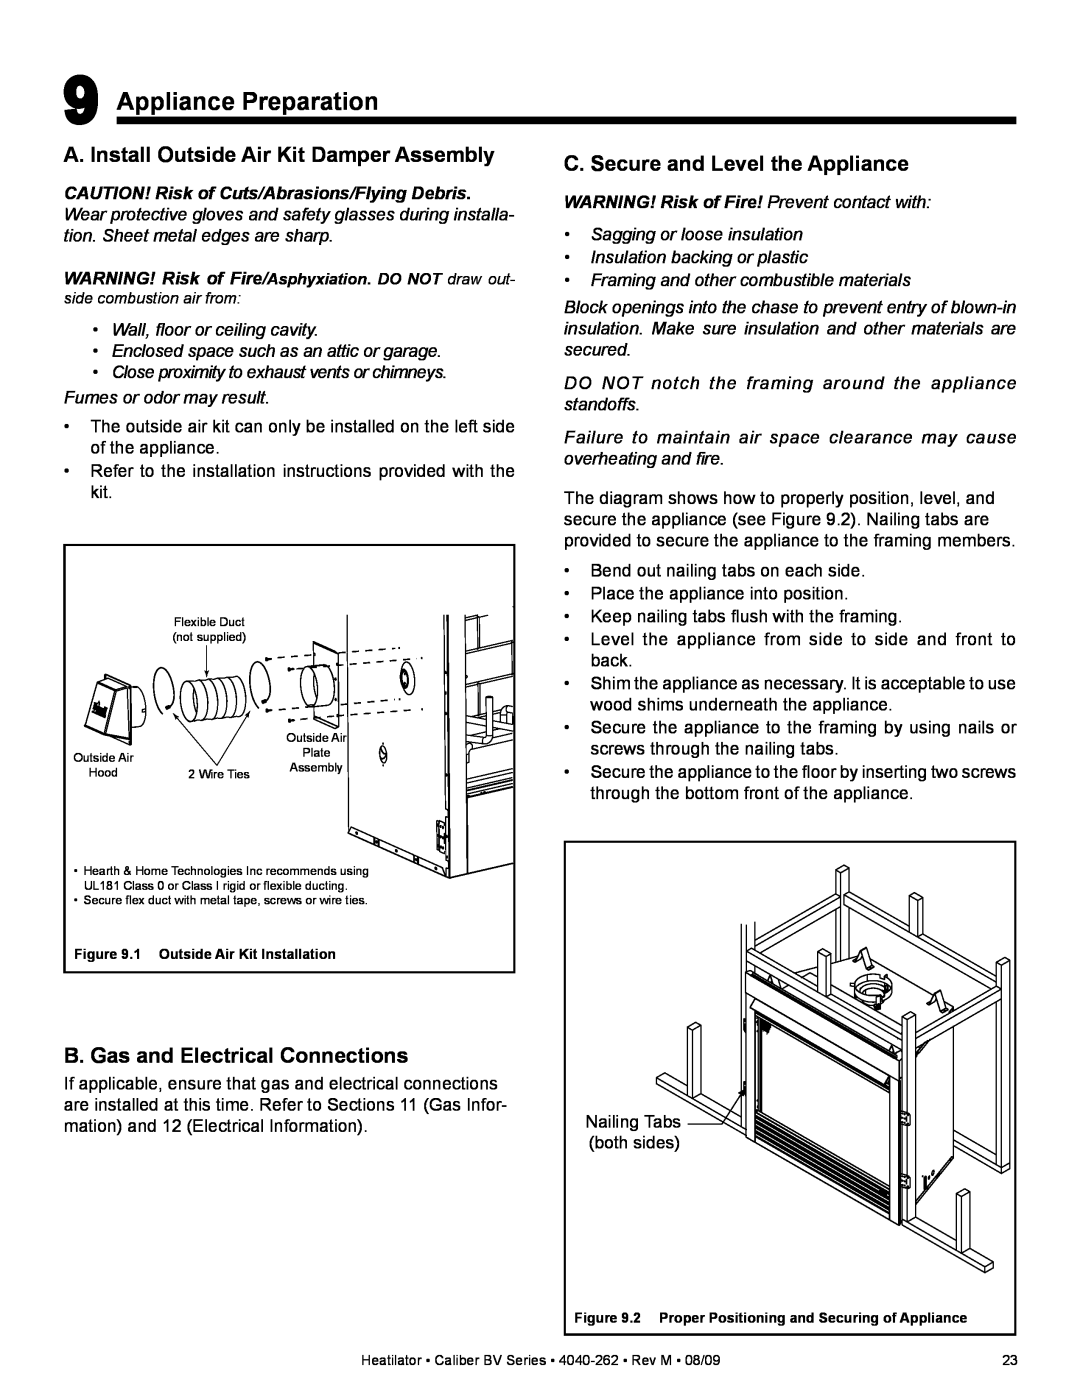 Heatiator CB4842IR A. Install Outside Air Kit Damper Assembly, C. Secure and Level the Appliance, Appliance Preparation 